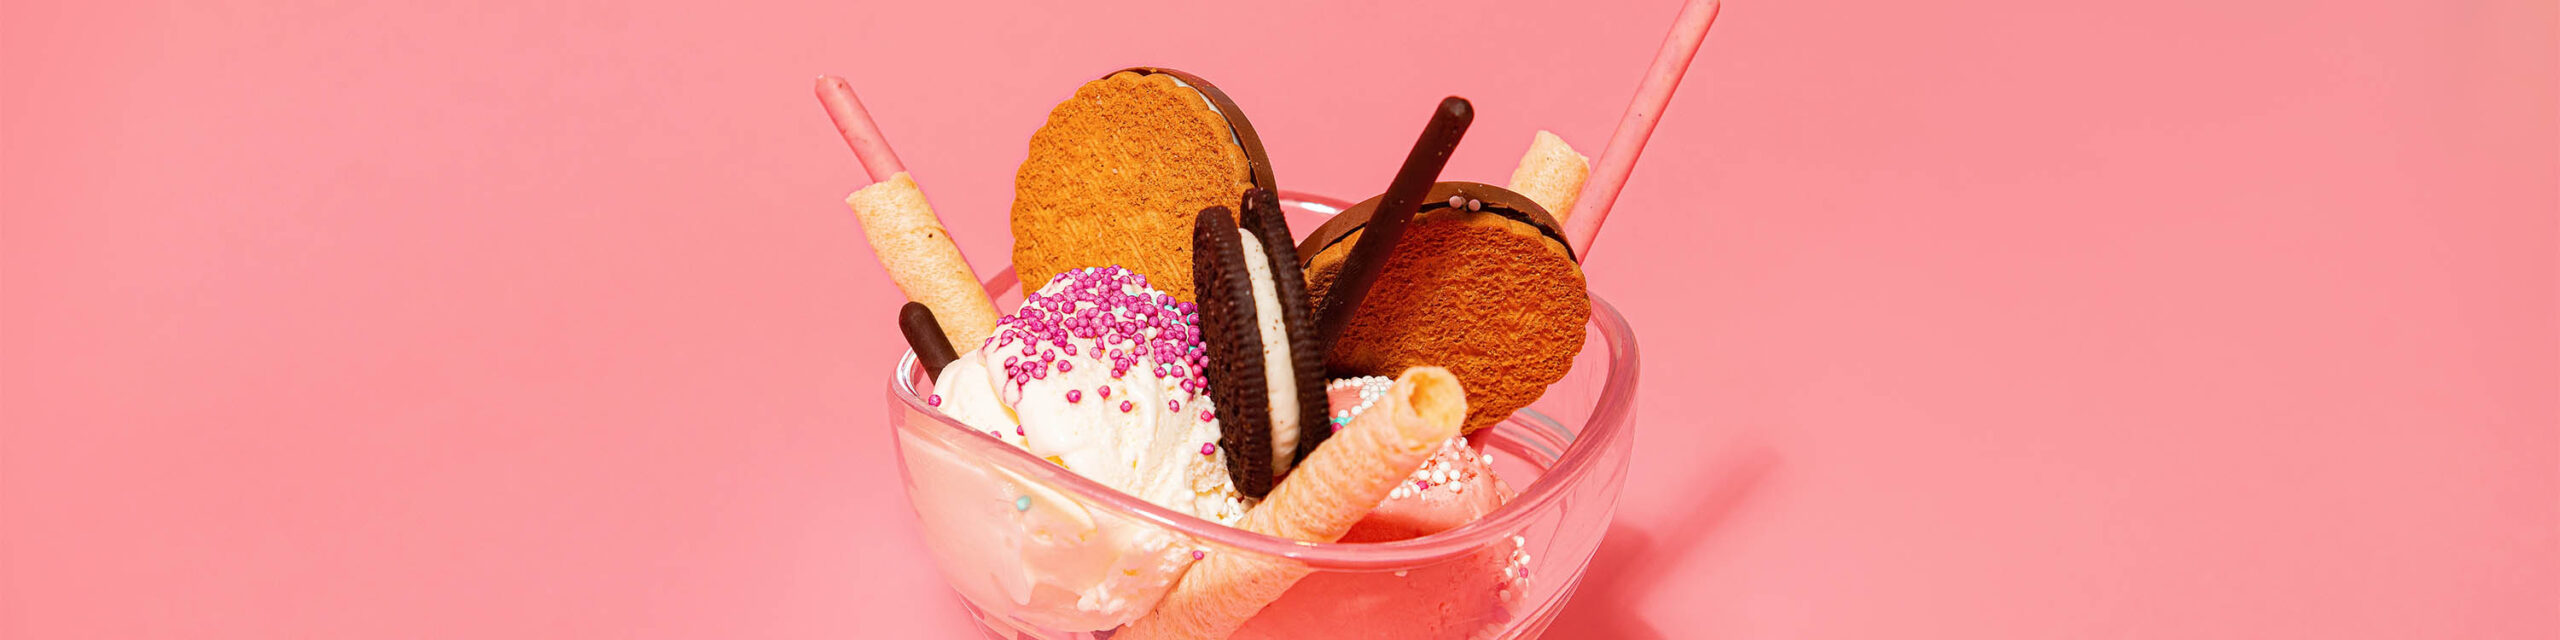 Vanilla ice cream with pink sprinkles and cookies in clear glass dish on pink background